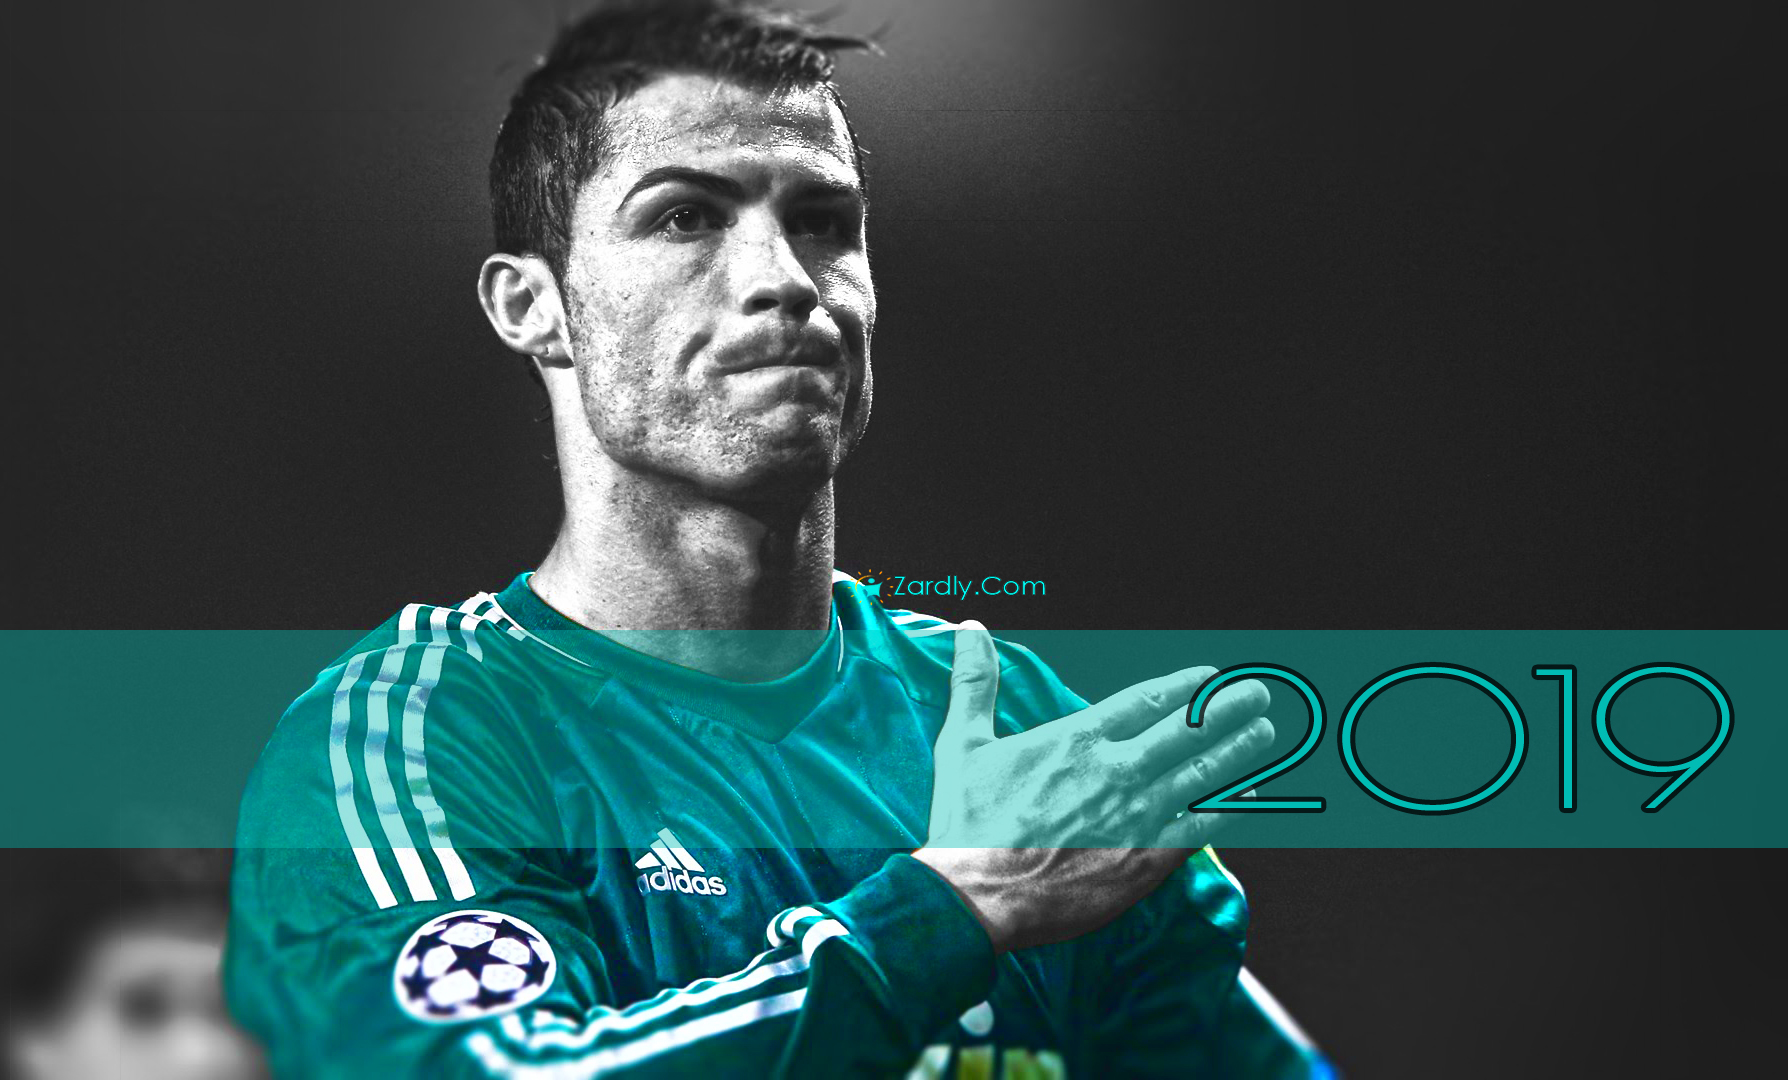 Cristiano Ronaldo Best Wallpaper Image And Pictures